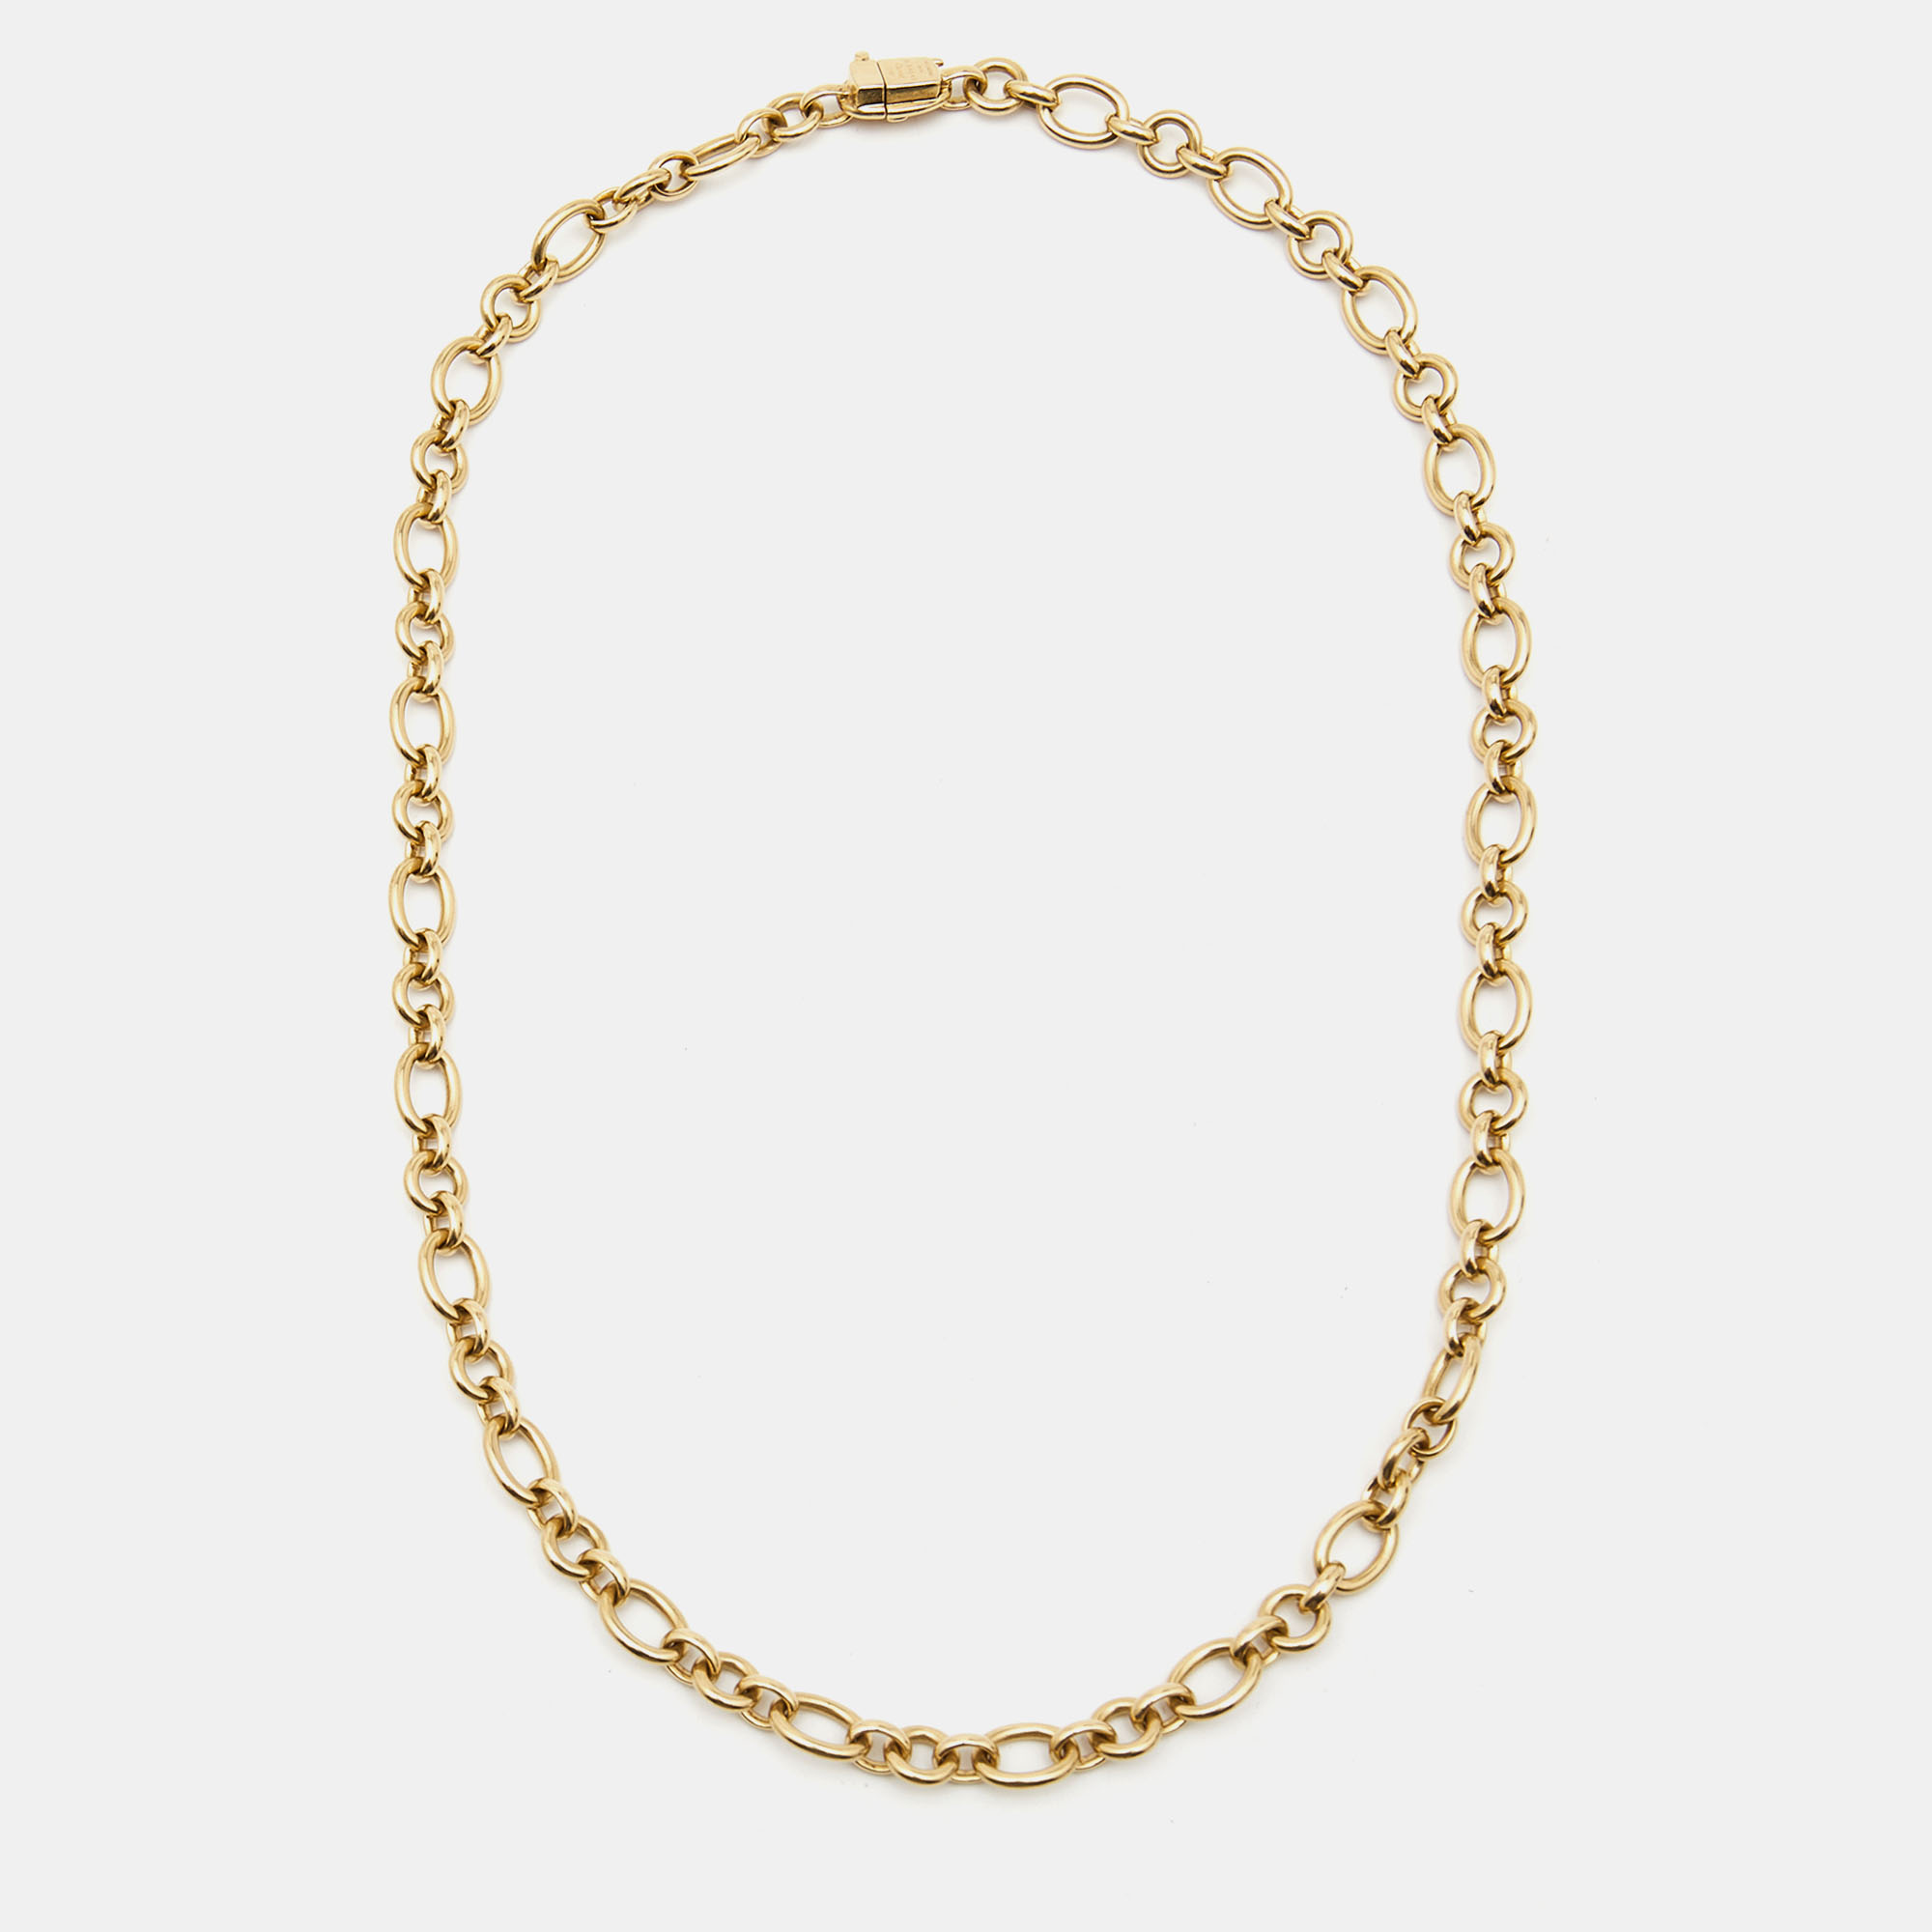 Cartier 18k Yellow Gold Chain Necklace